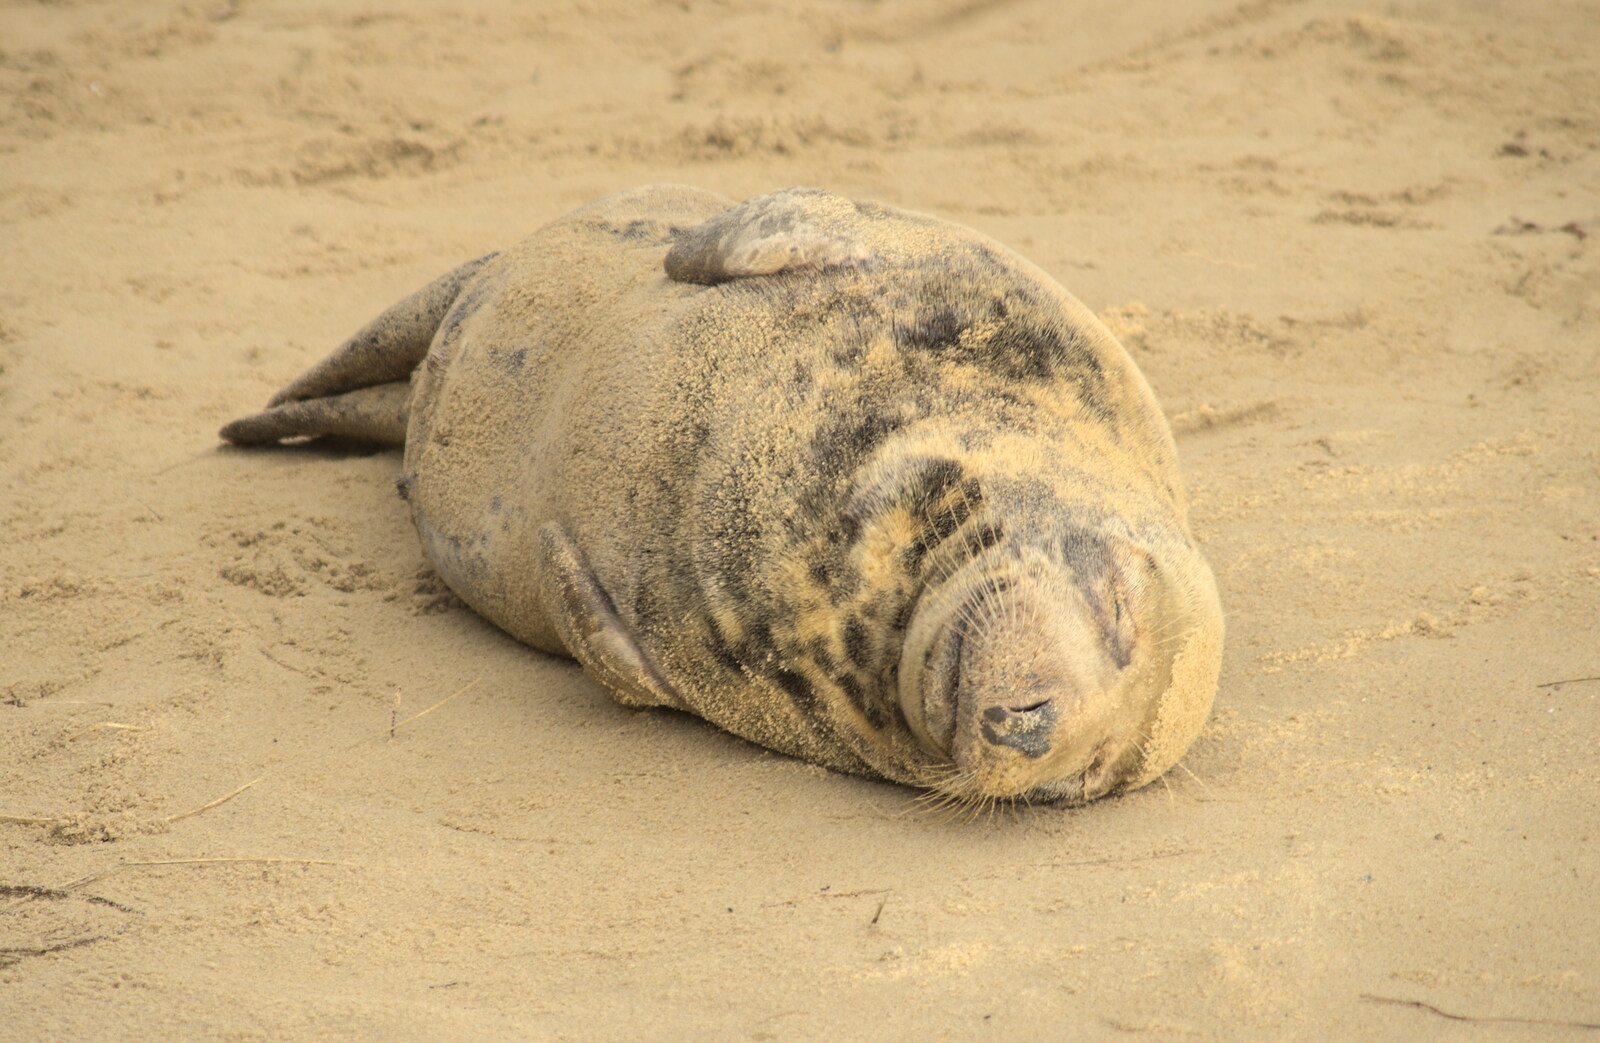 Happiness, seal style from Horsey Seals and Sea Palling, Norfolk Coast - 2nd January 2017